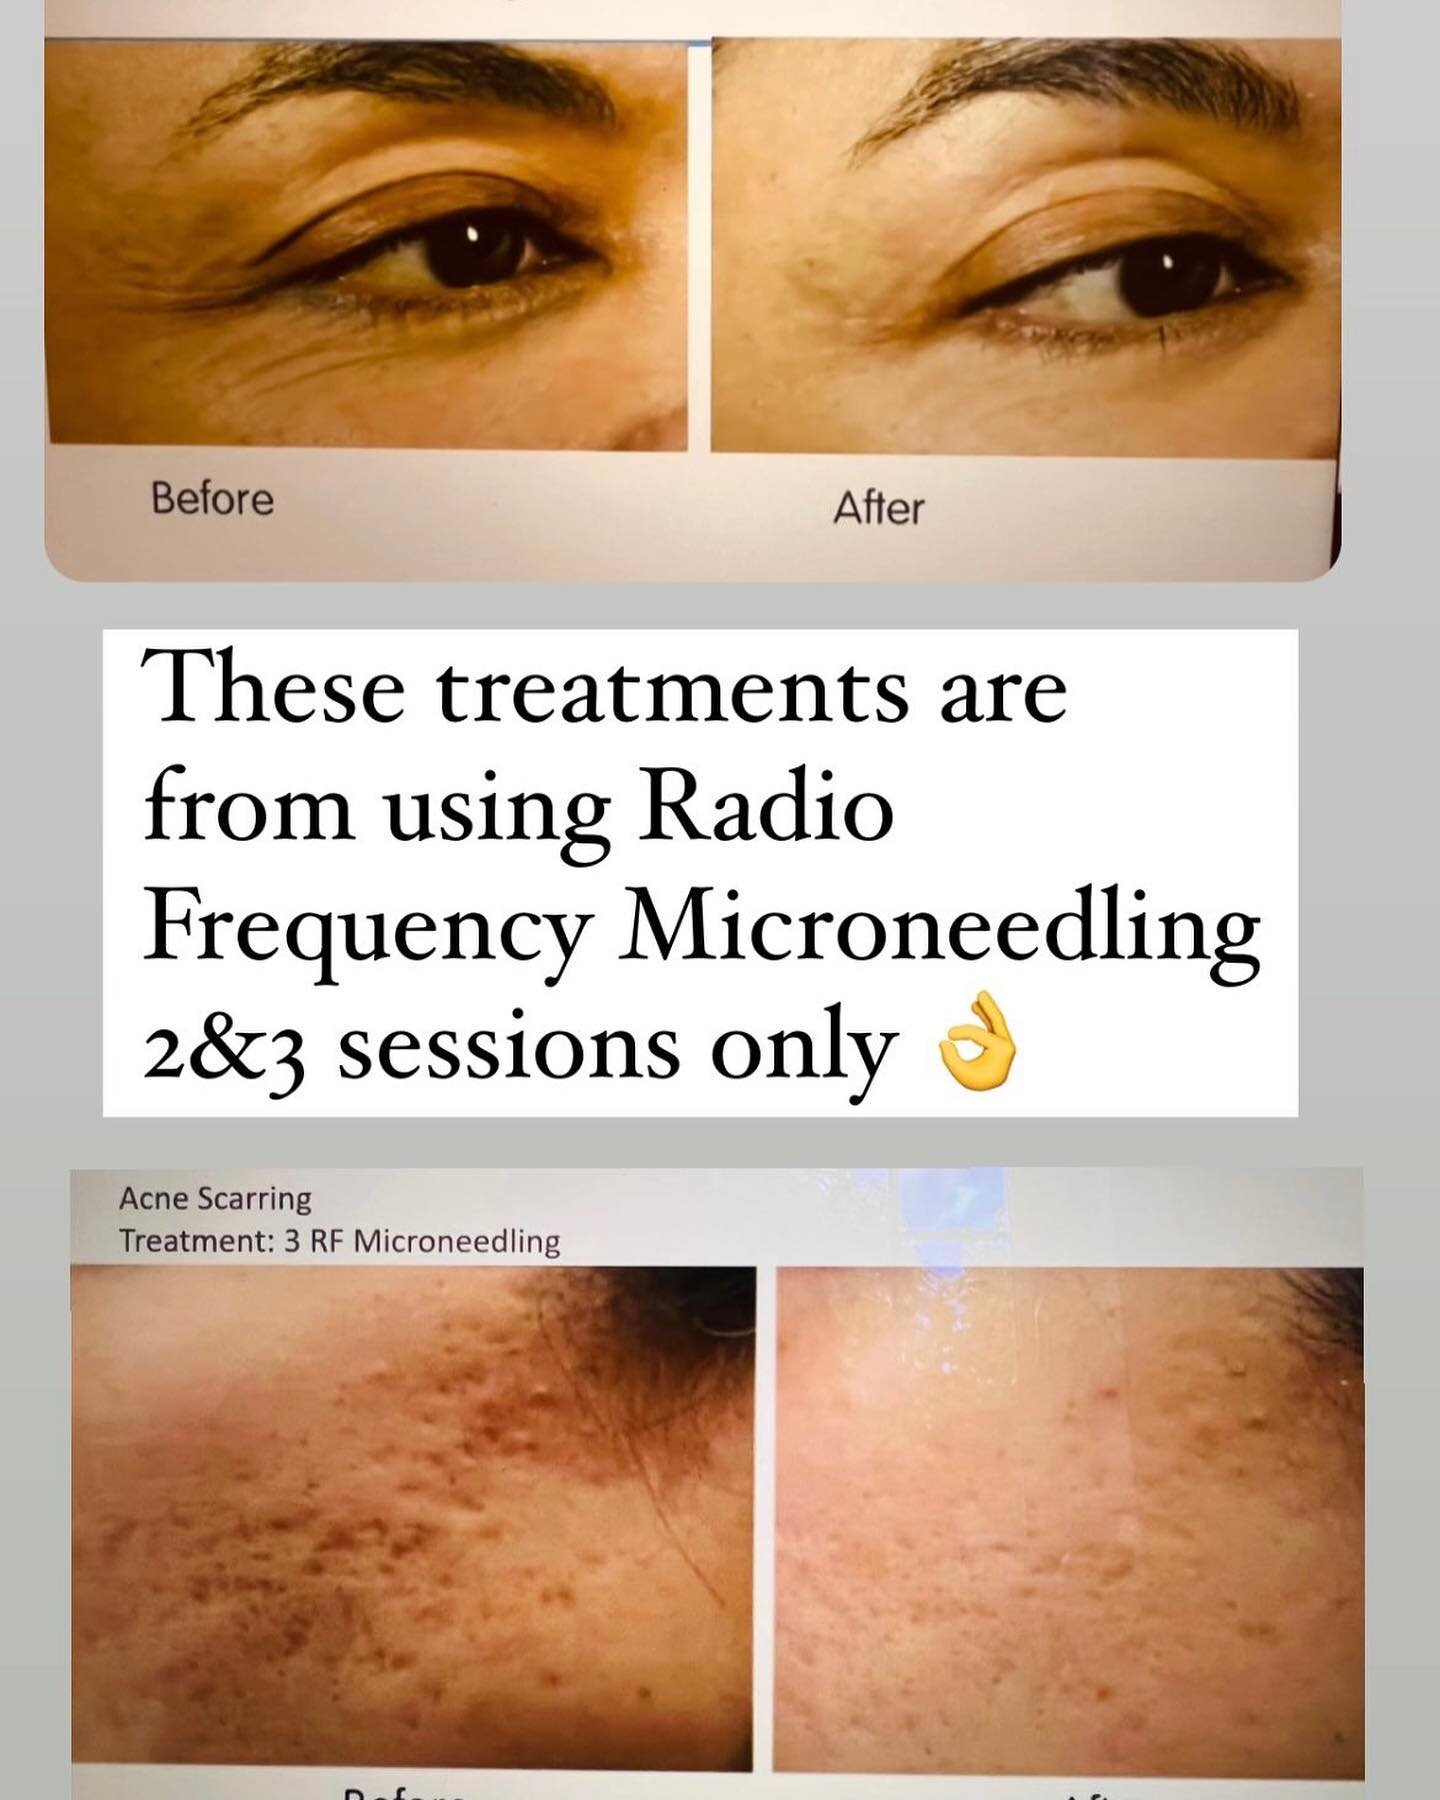 Let&rsquo;s talk Radio Frequency Microneedling this will Improve the texture and appearance of your skin using super fine micro needles and heat. 
Our breakthrough skin tightening microneedling can leave your skin smoother and firmer as well as reduc